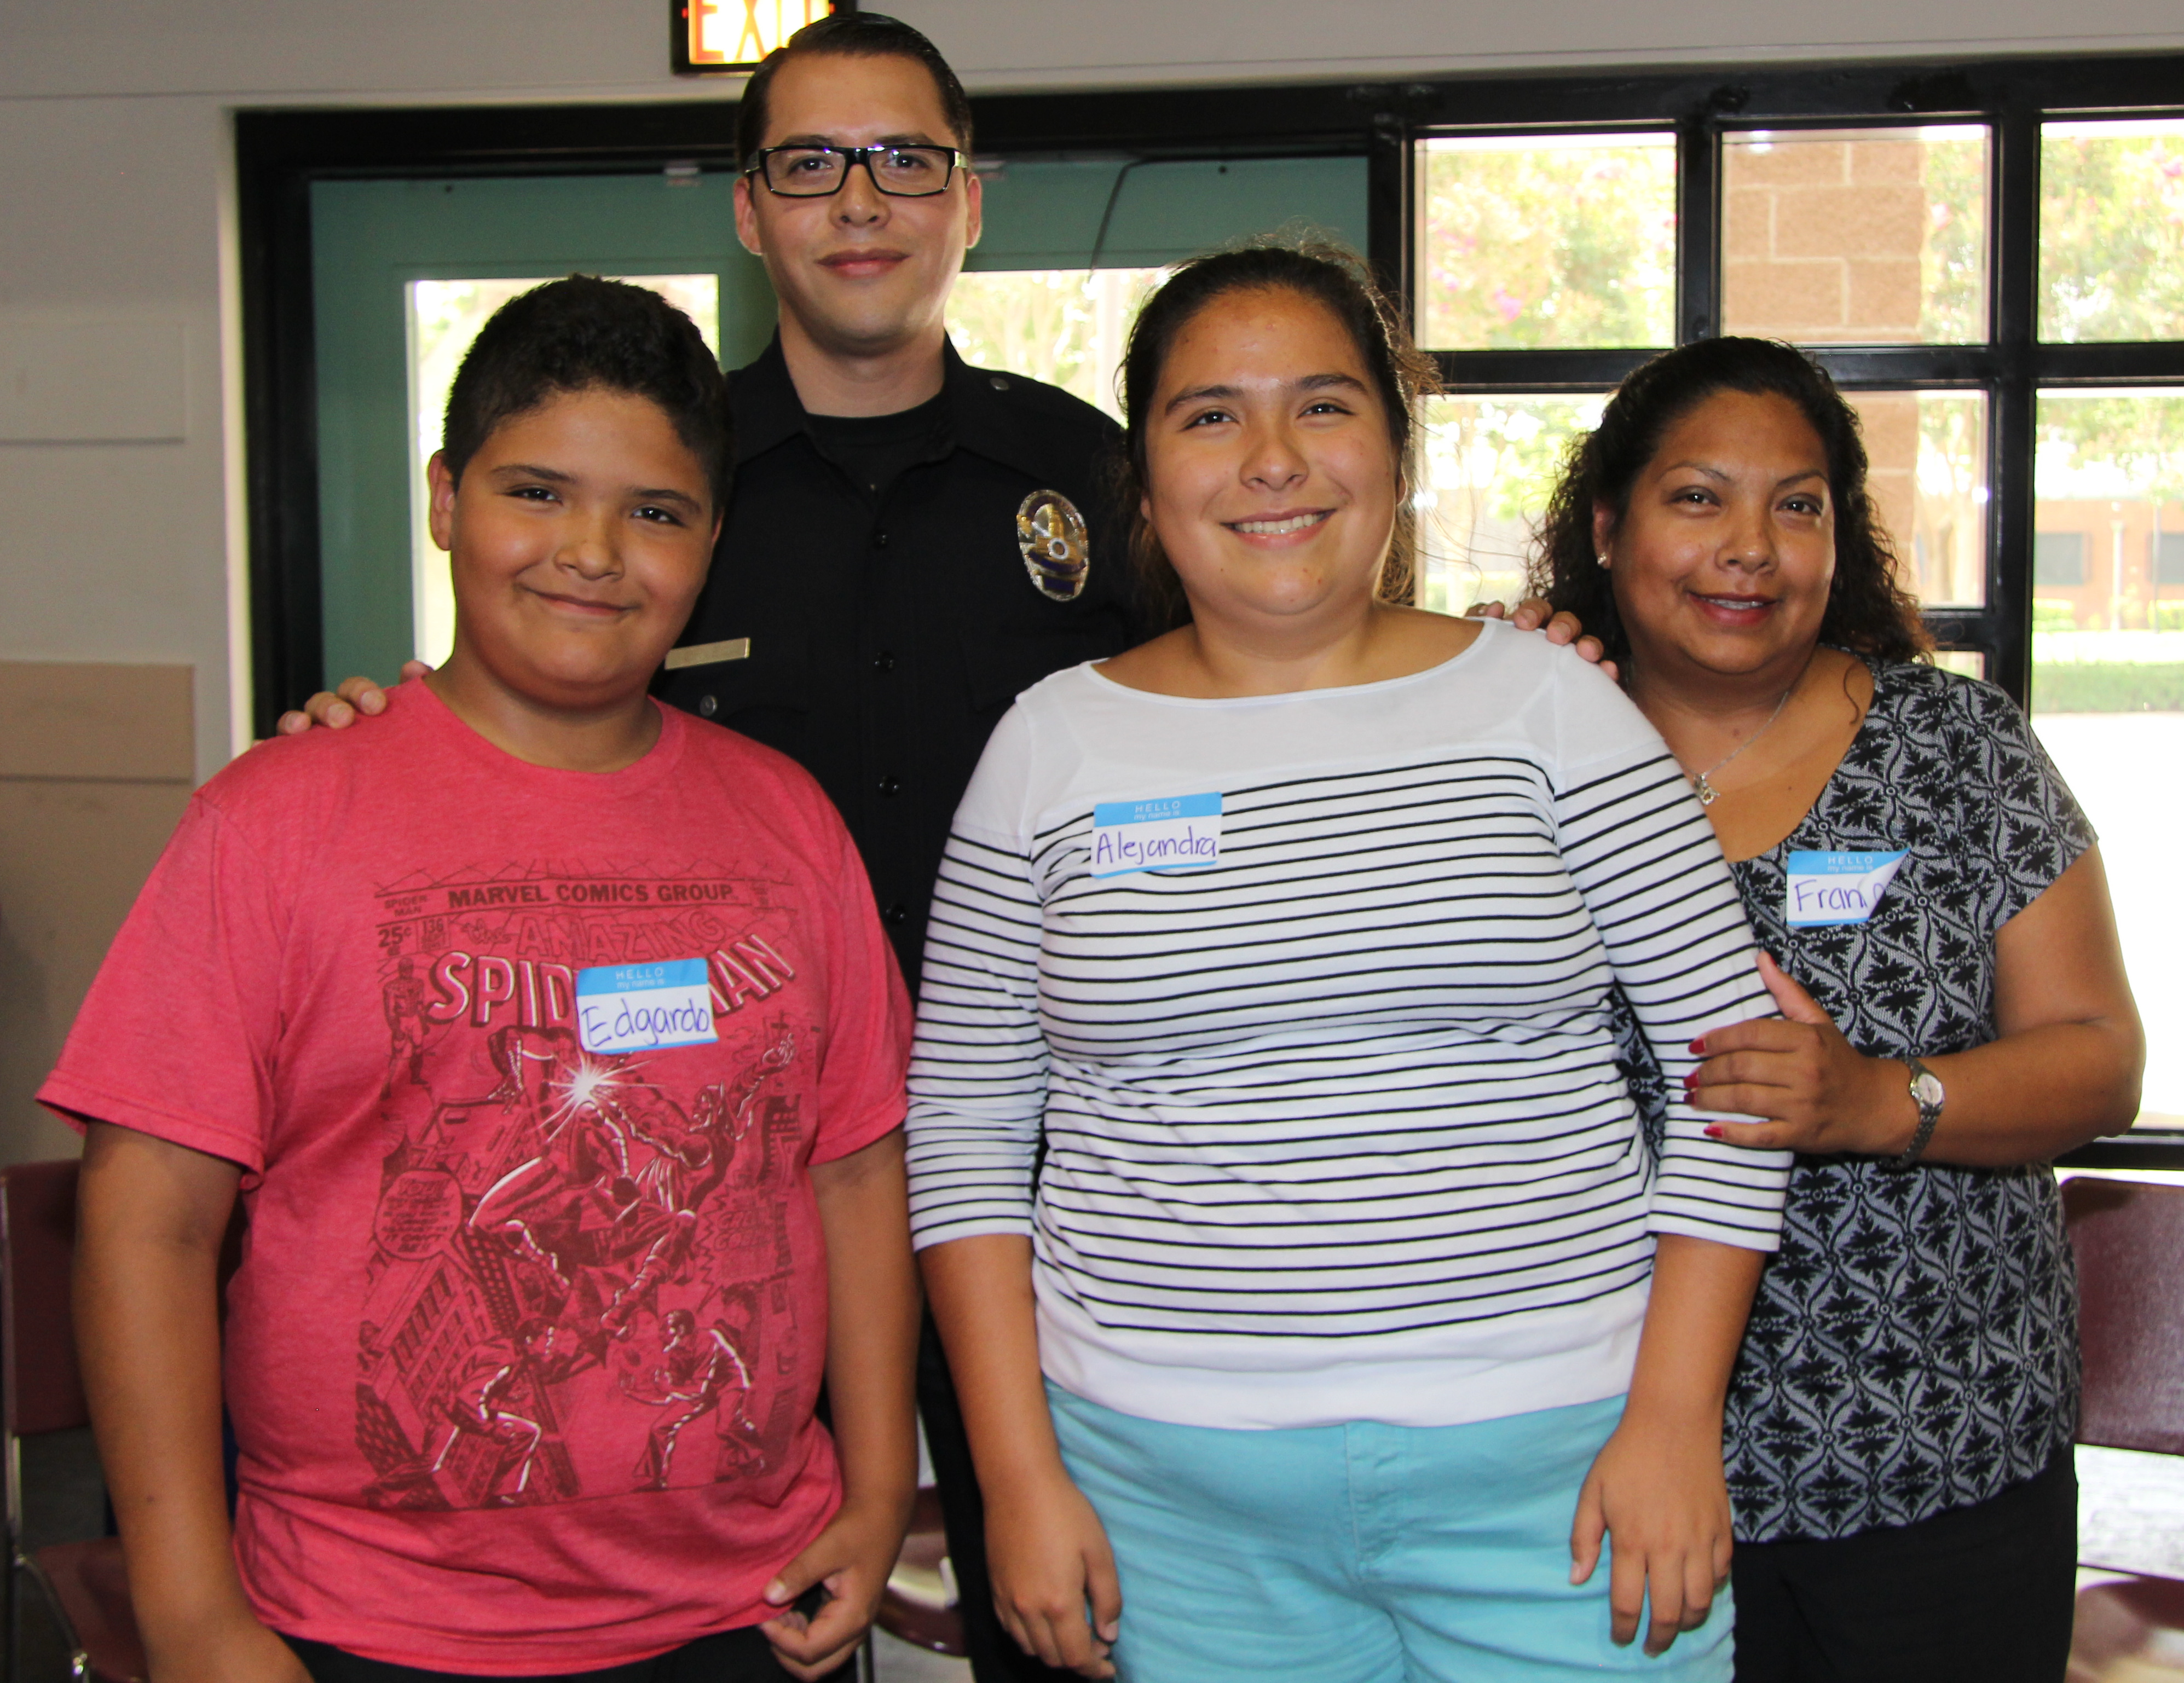 At a BE SAFE Interactive Screening, officers get to know youth from the community they serve